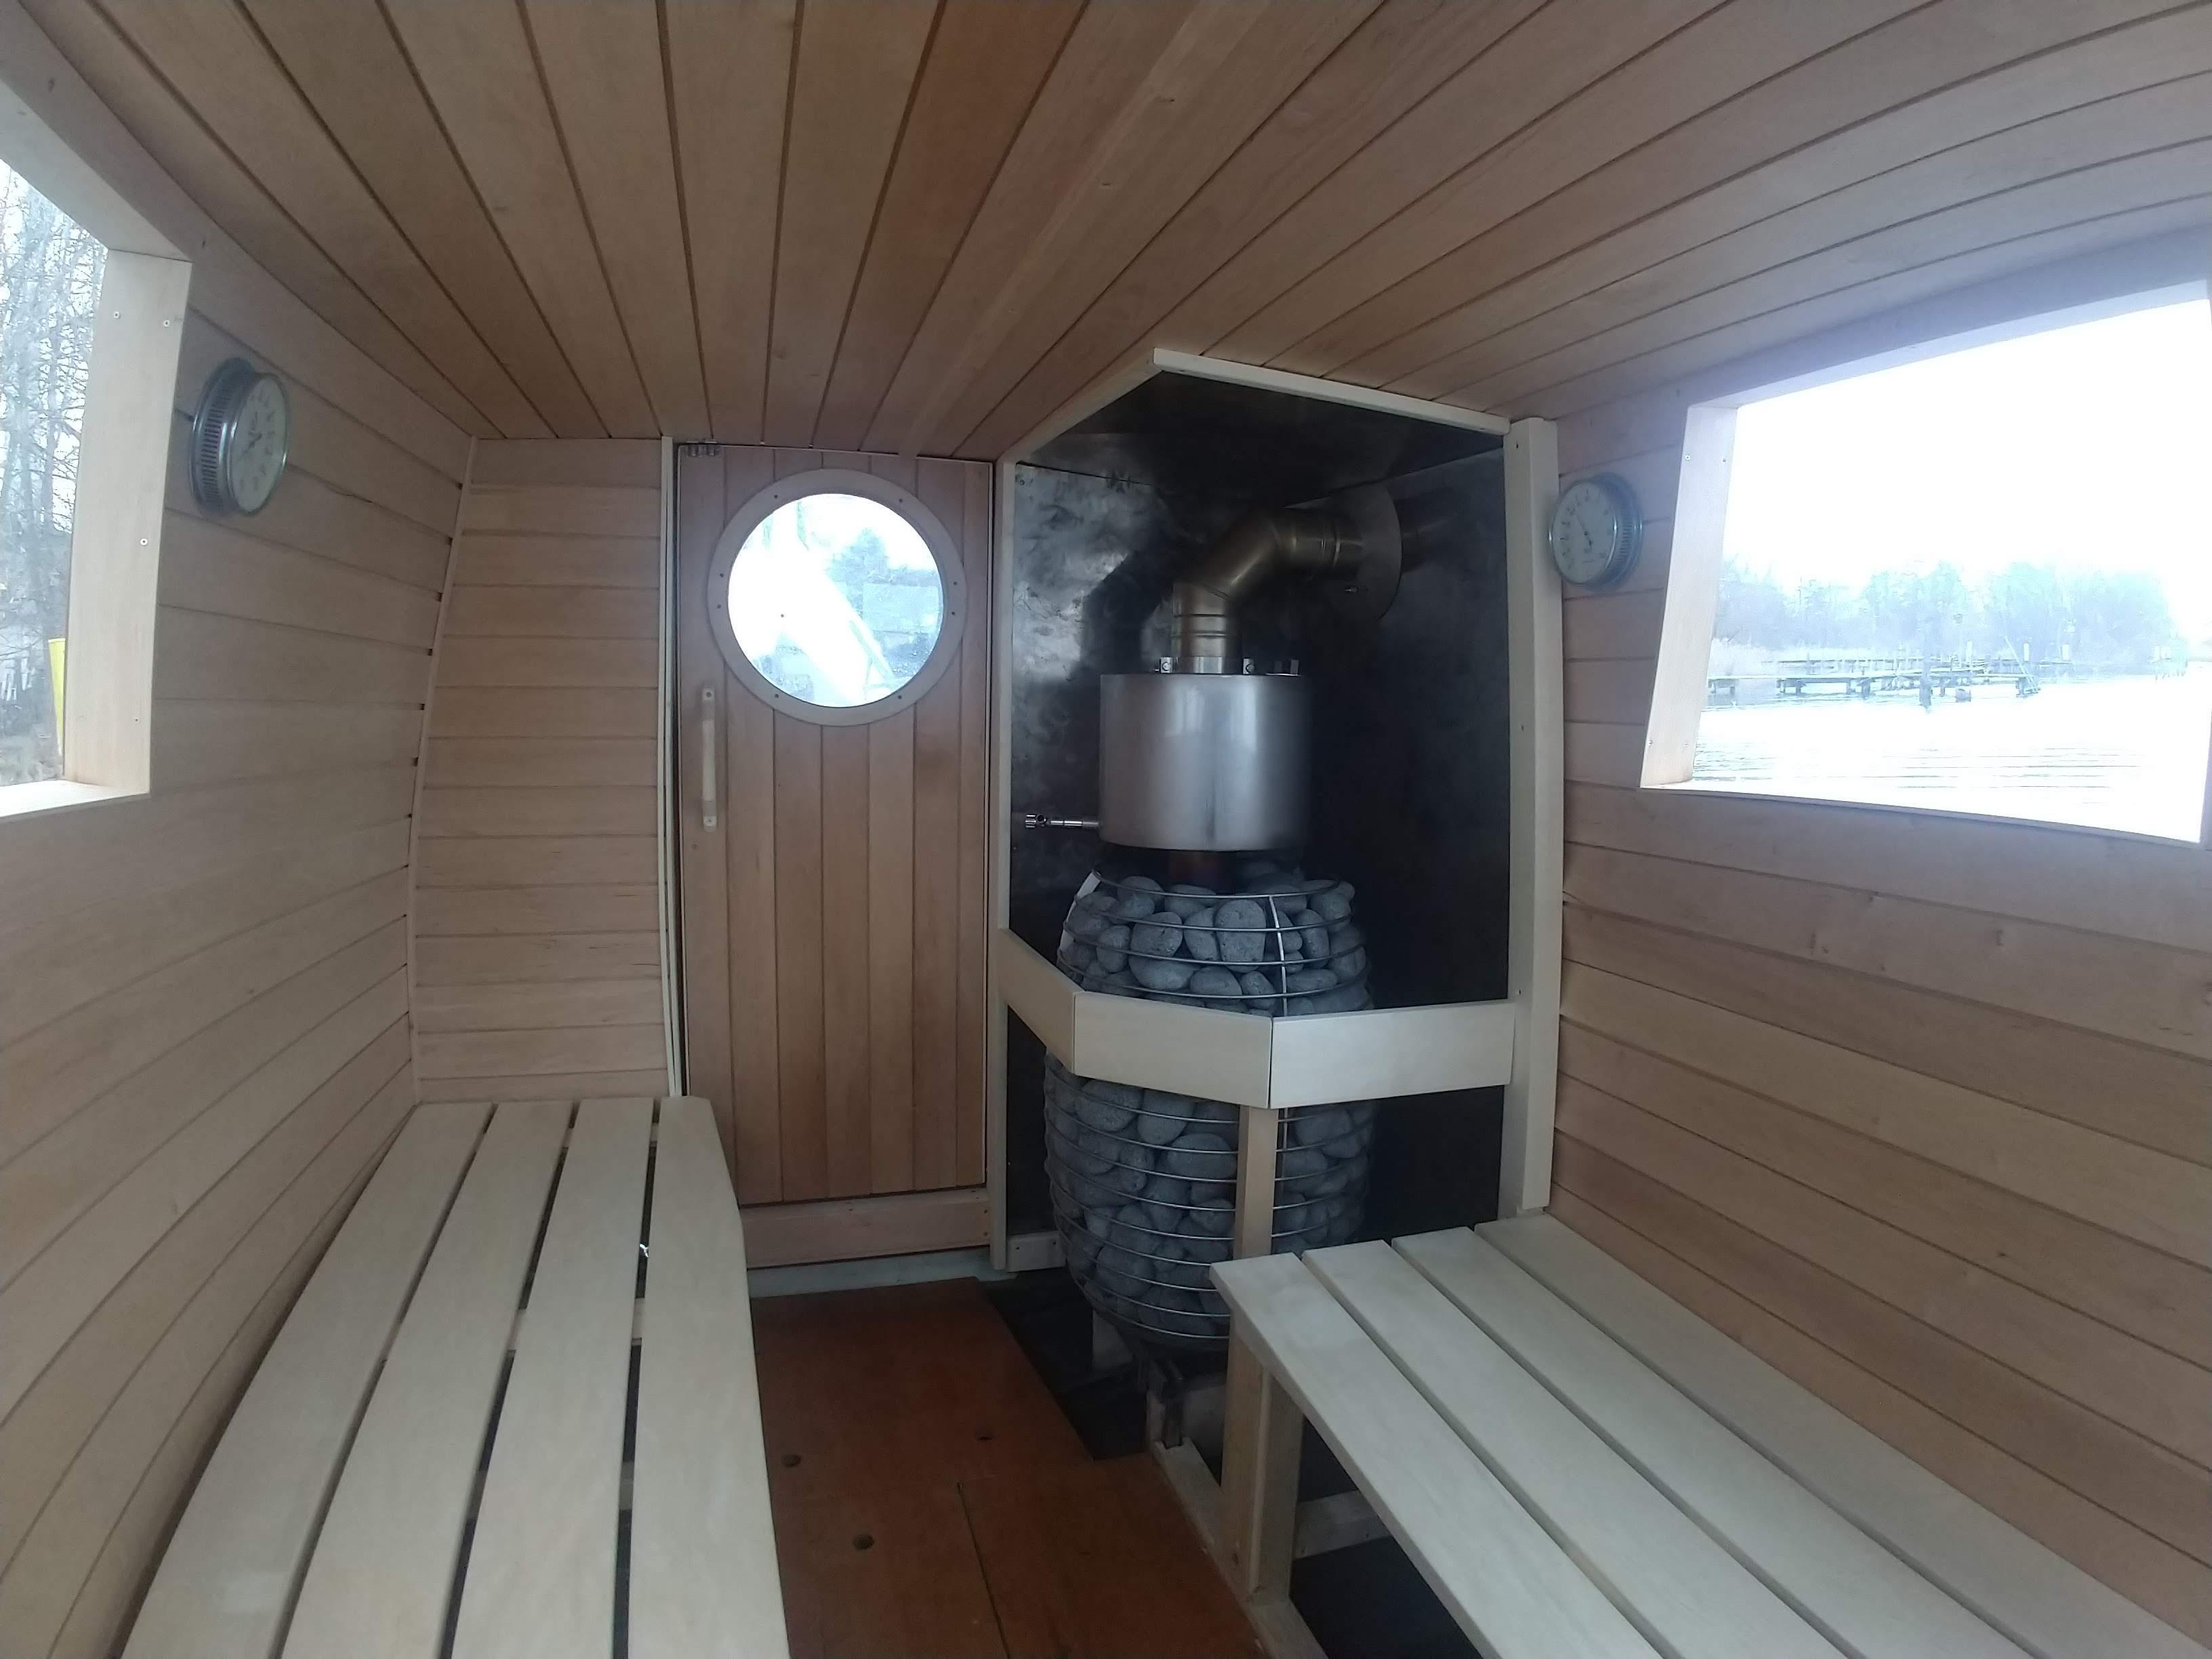 Saunaboat: Turning an Old Unused Boat Into a Swimming Sauna